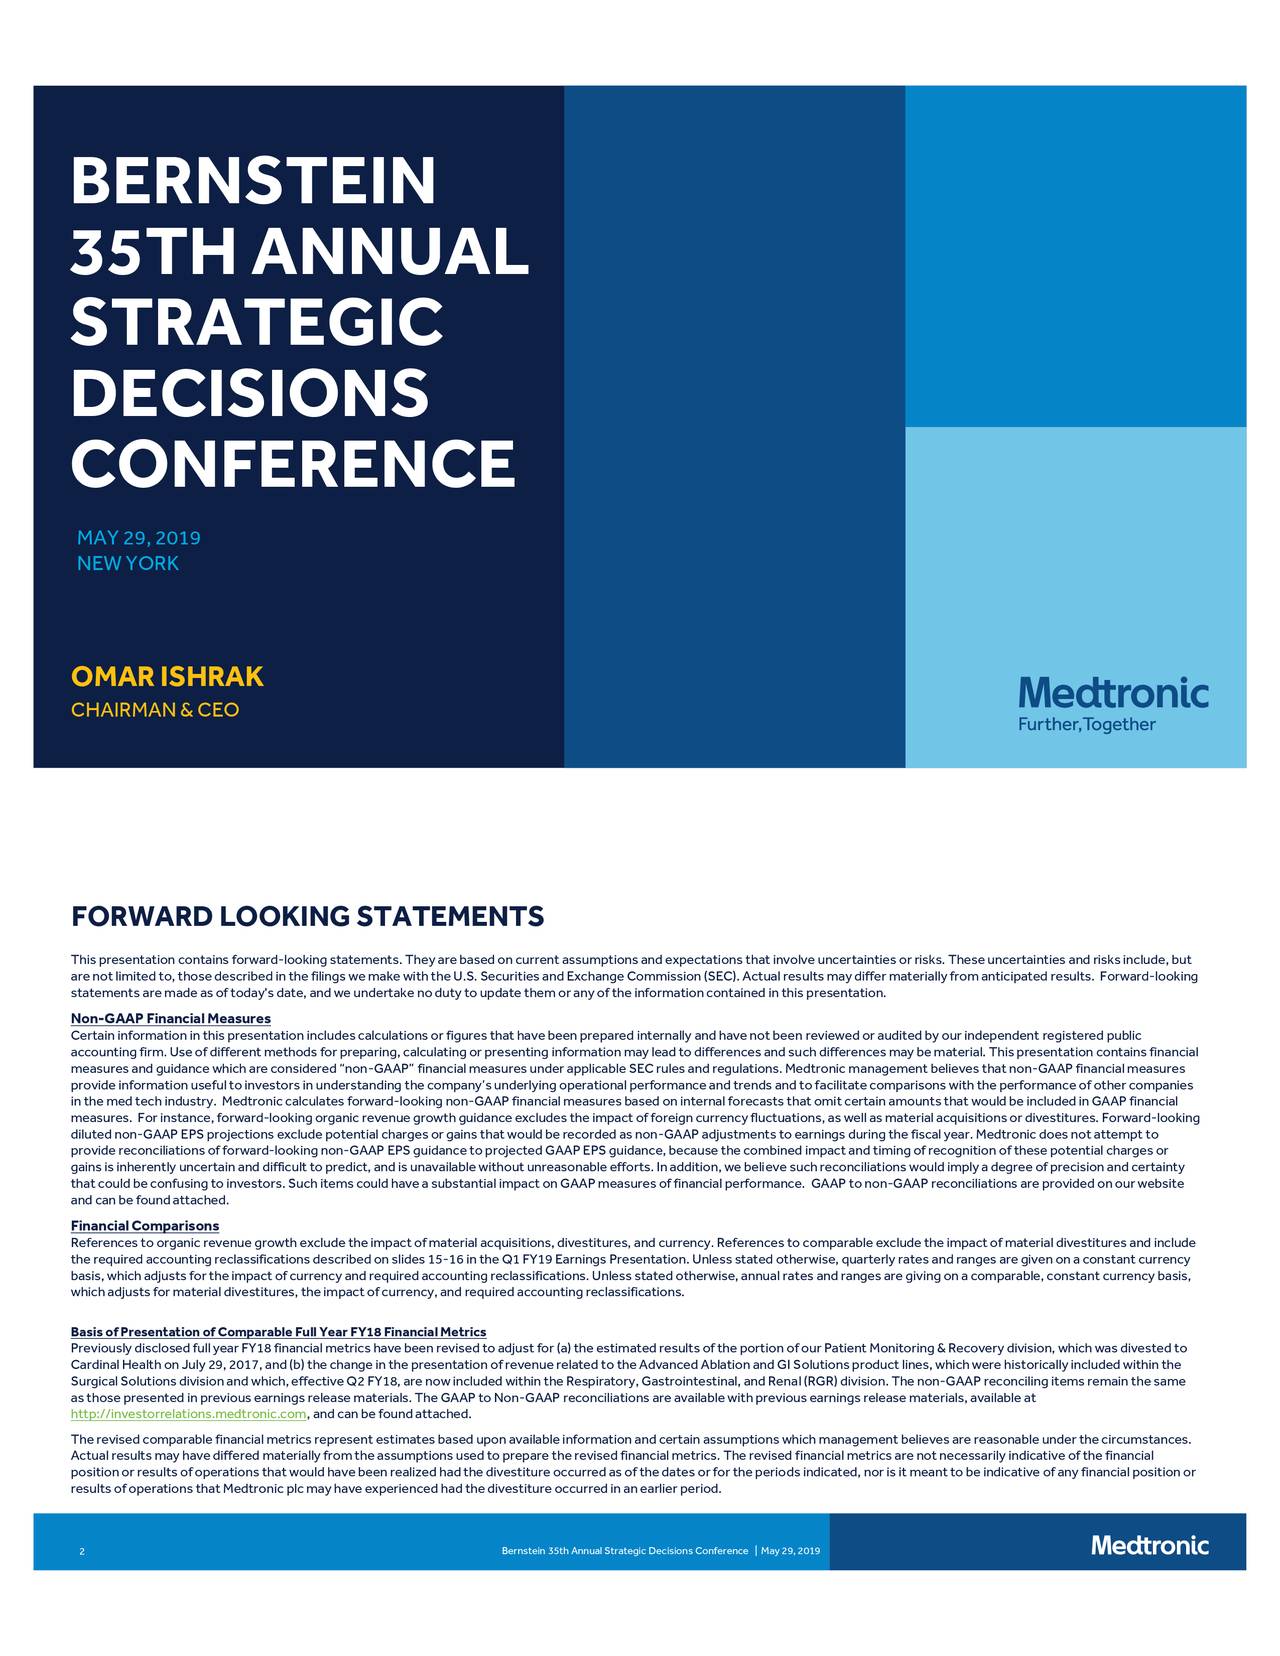 Medtronic (MDT) Presents At Bernstein Strategic Decisions Conference